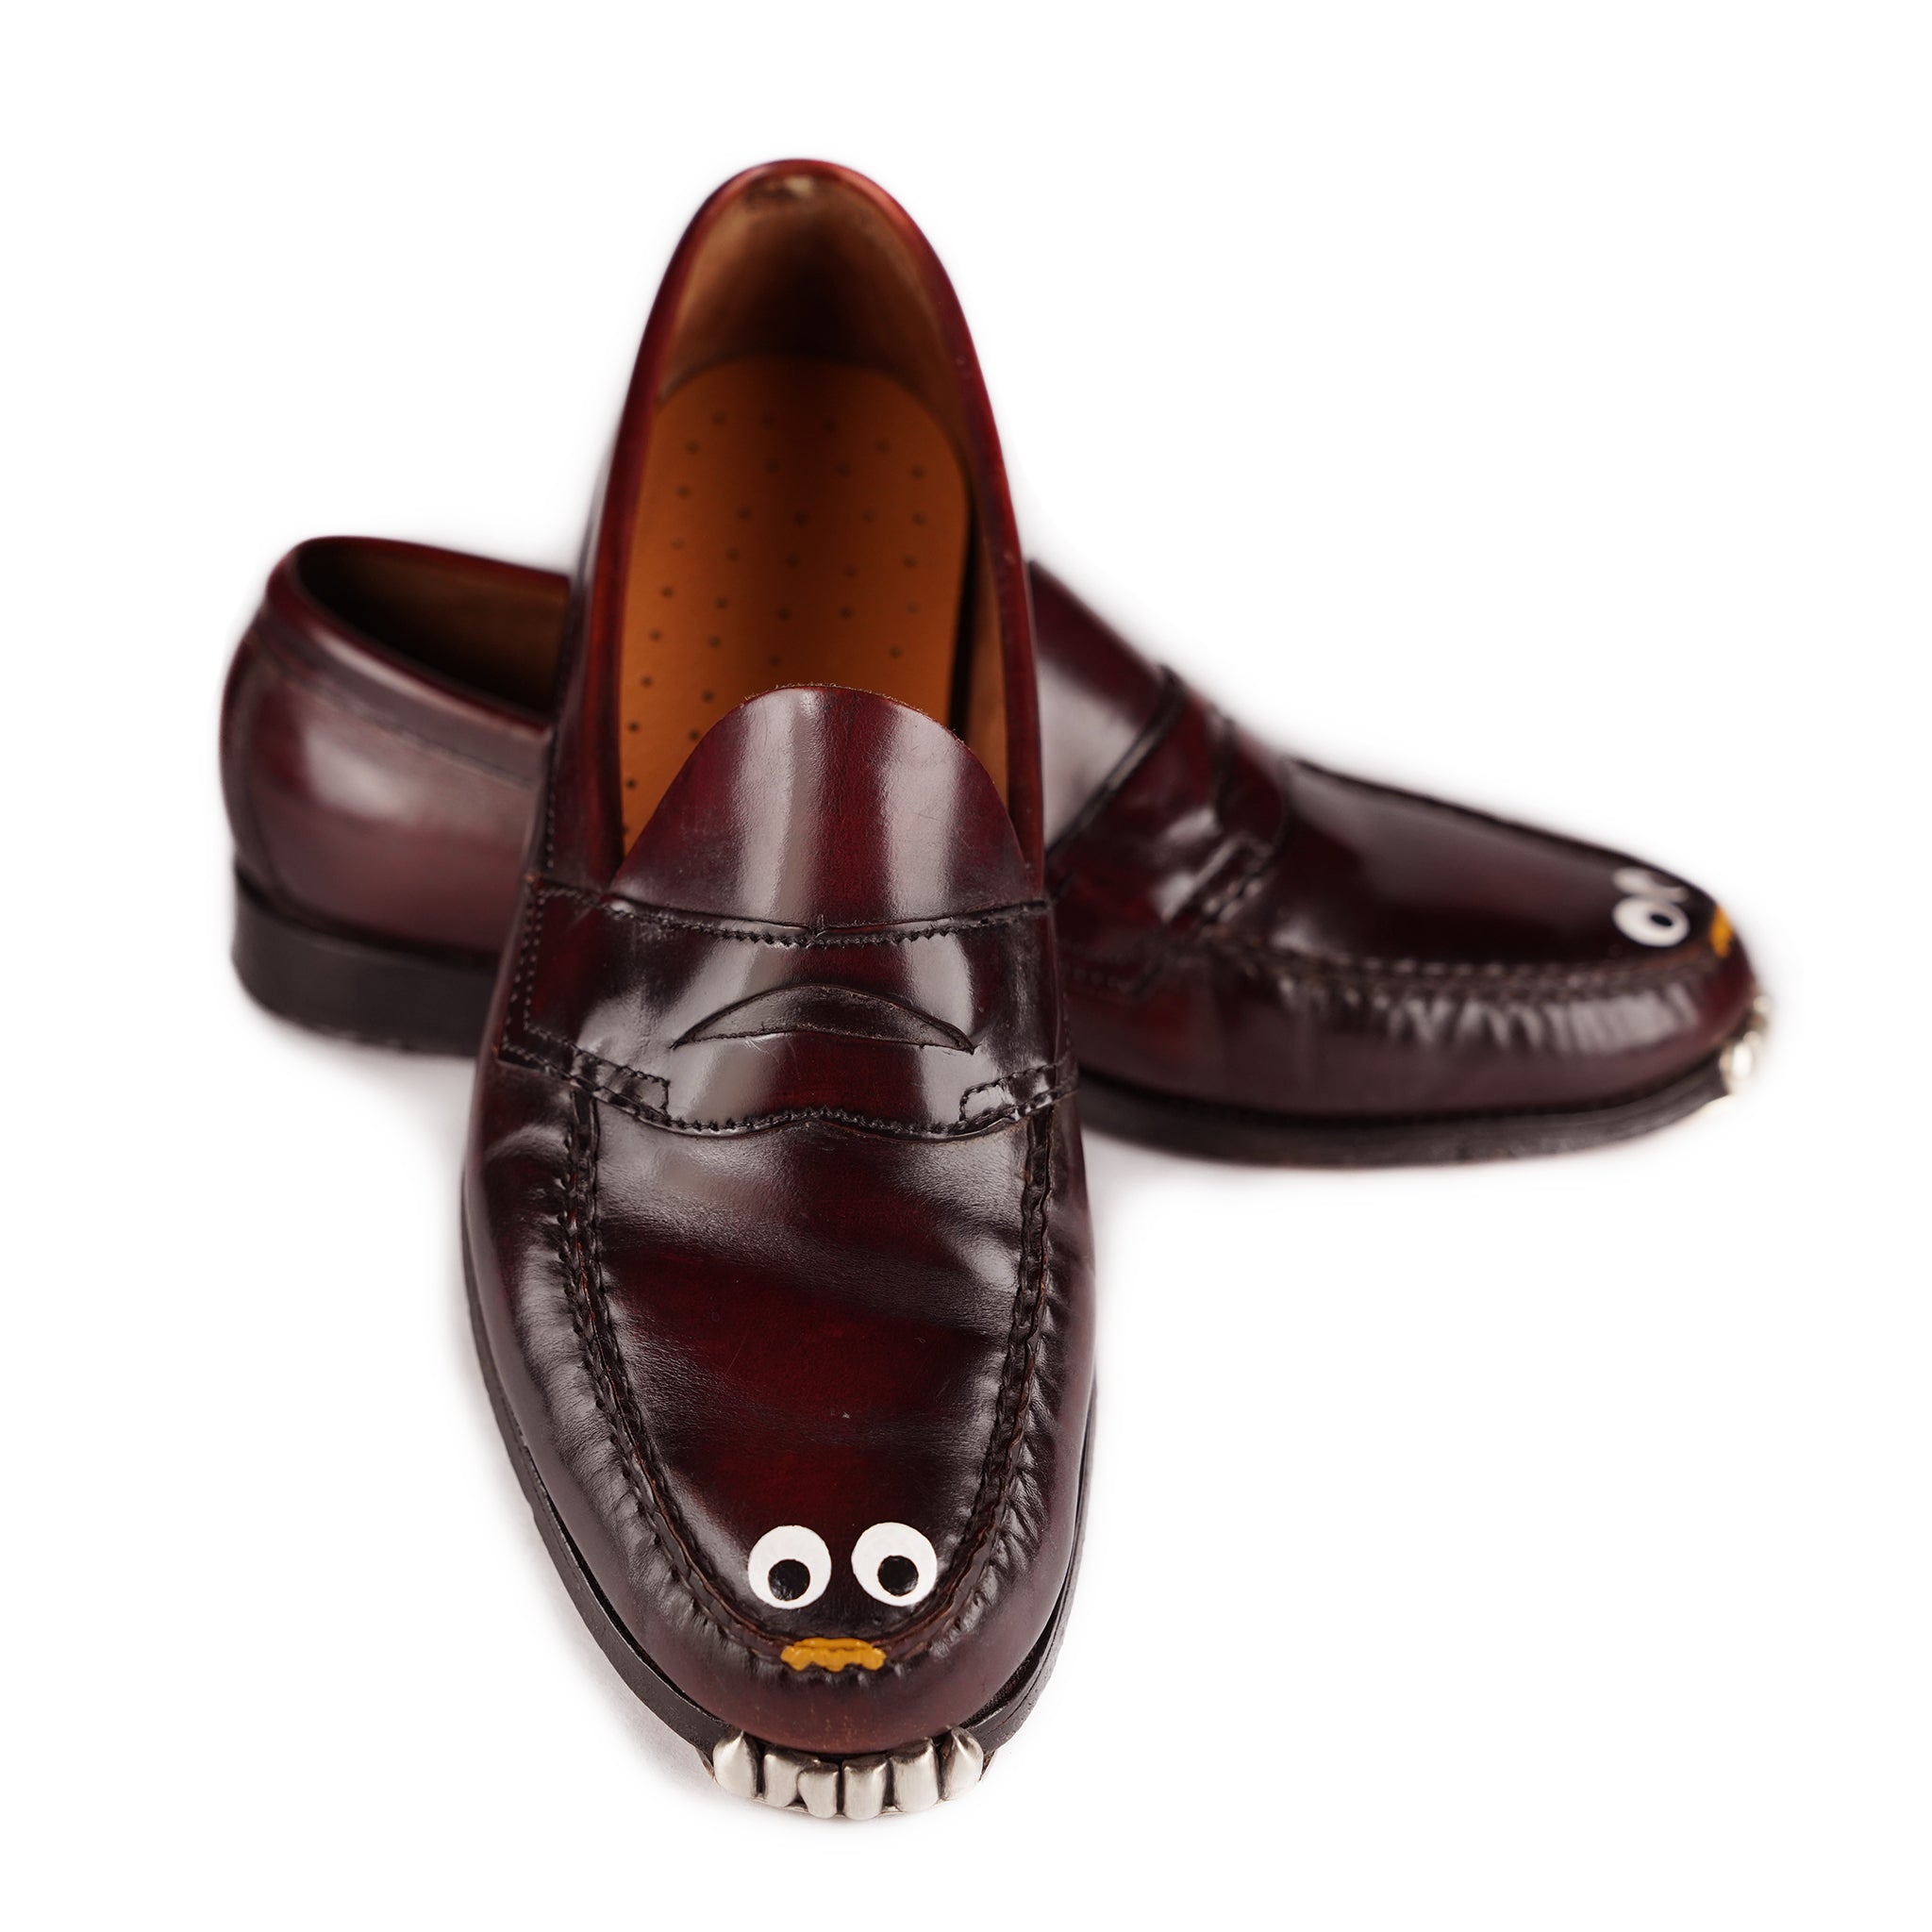 Oxblood Googly Eyed Puppy Loafer